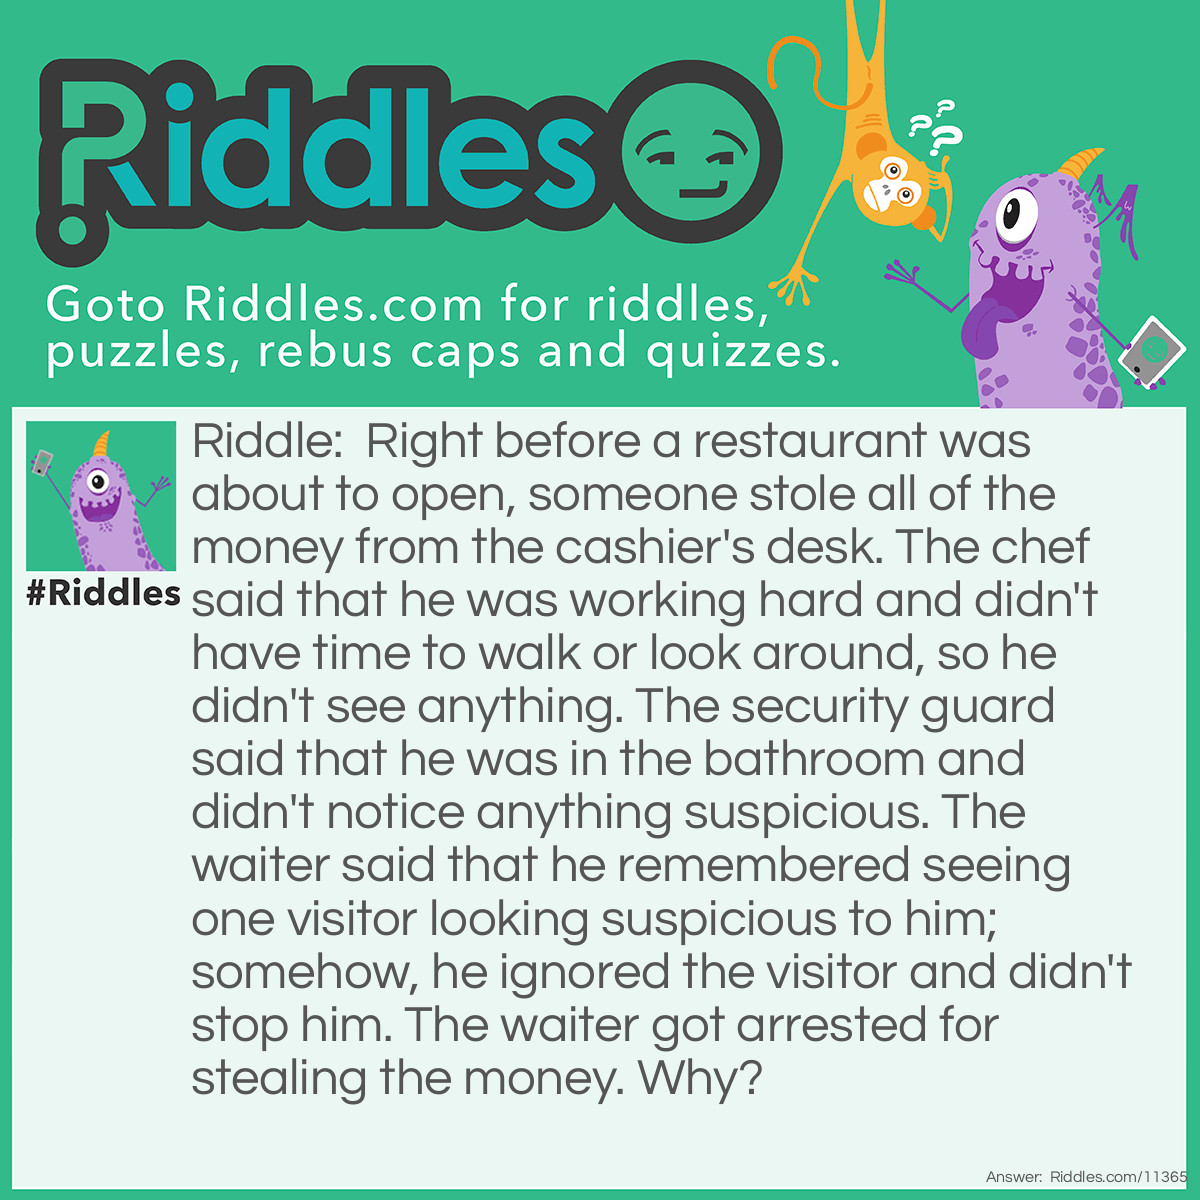 Riddle: Right before a restaurant was about to open, someone stole all of the money from the cashier's desk. The chef said that he was working hard and didn't have time to walk or look around, so he didn't see anything. The security guard said that he was in the bathroom and didn't notice anything suspicious. The waiter said that he remembered seeing one visitor looking suspicious to him; somehow, he ignored the visitor and didn't stop him. The waiter got arrested for stealing the money. Why? Answer: The phrase, "Right before a restaurant was about to open…" means that the restaurant was still closed. There couldn't have been any visitors inside. Therefore, the waiter is lying.